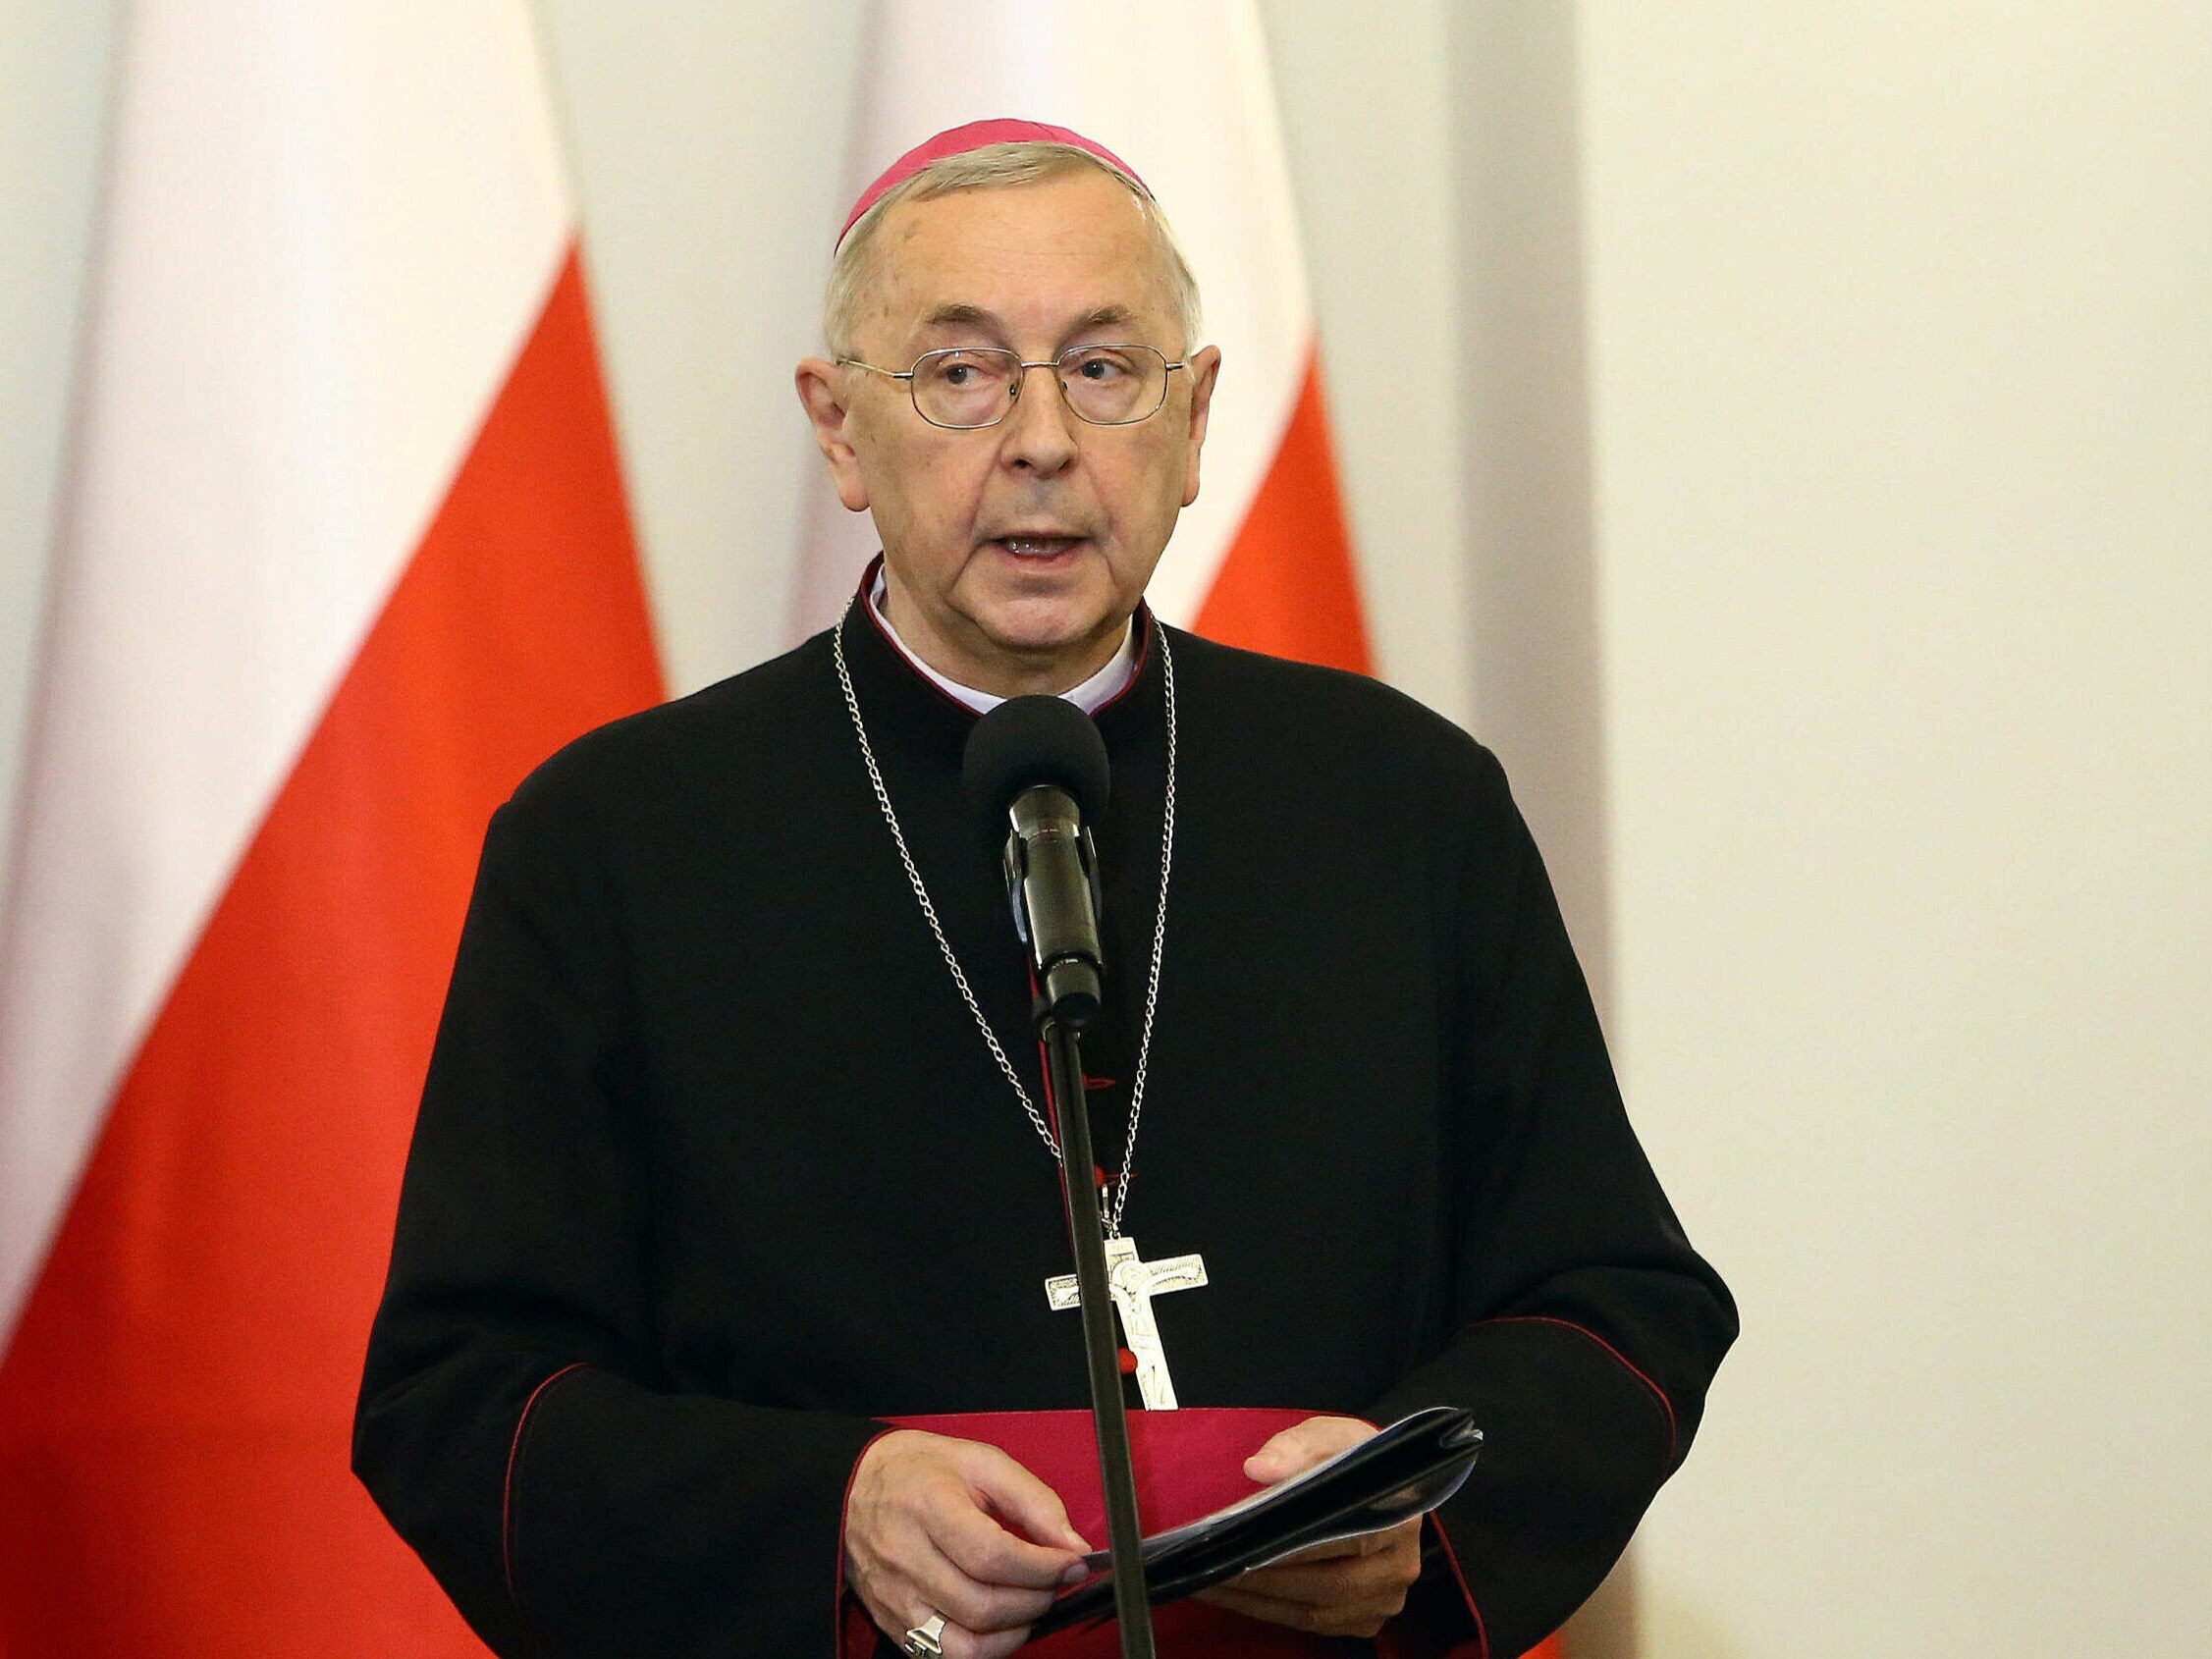 Archbishop Gądecki wrote to Duda: In vitro is production and experimentation